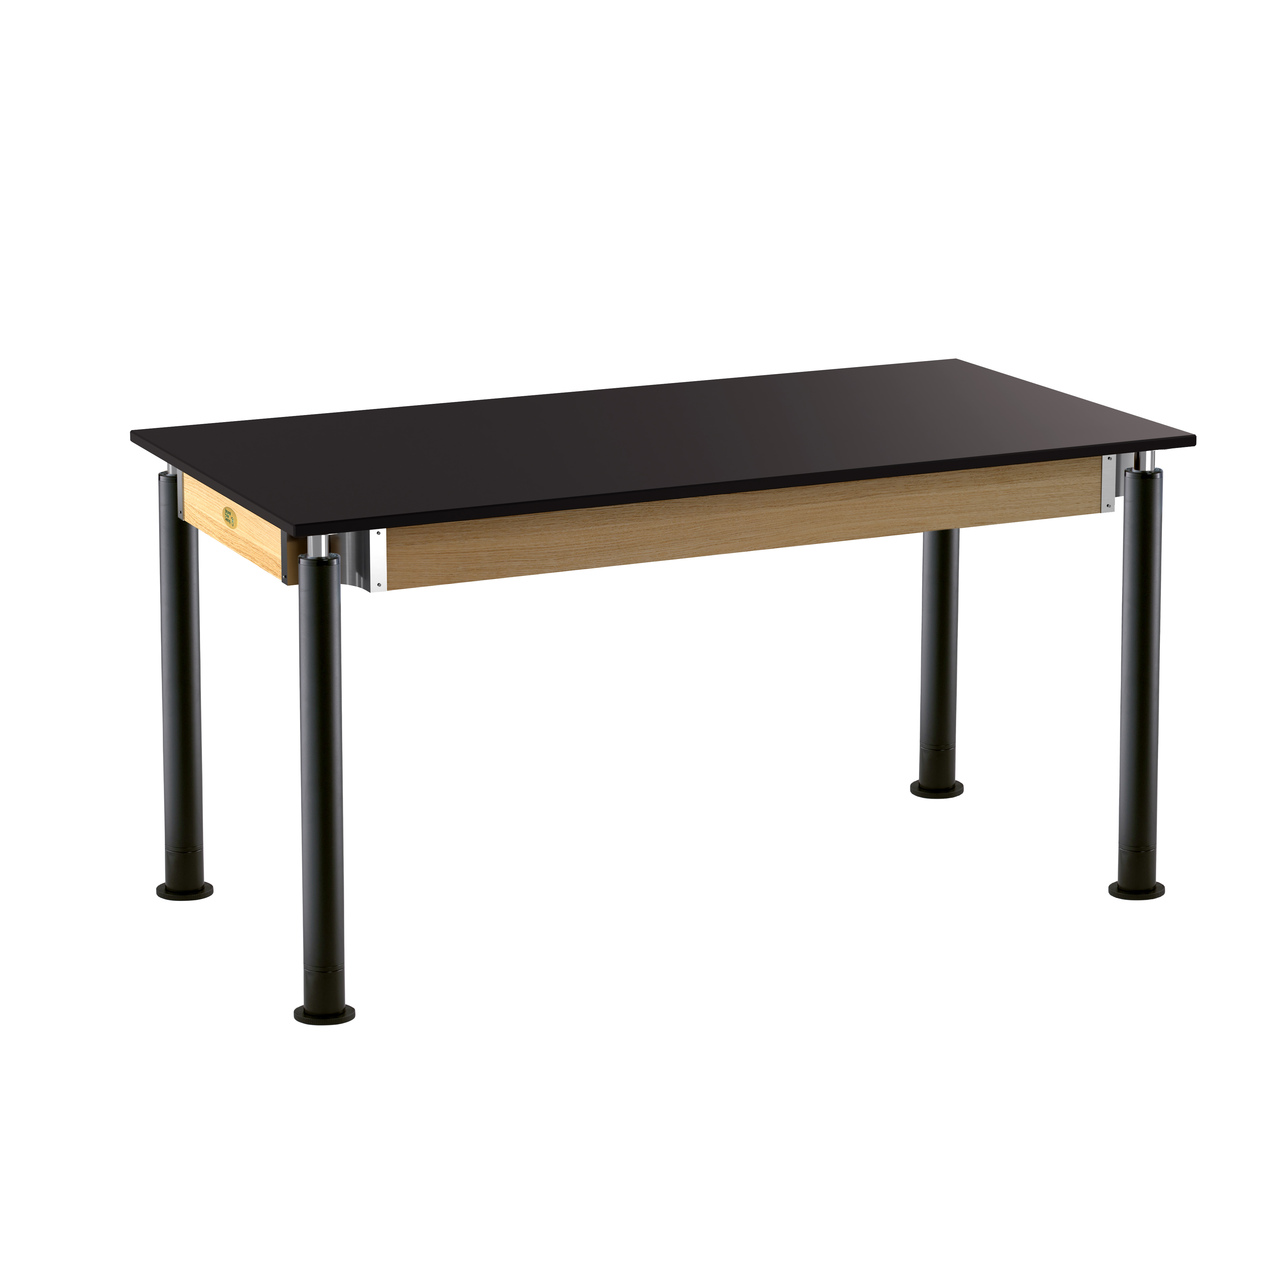 NPS Signature Science Lab Table, Black, 30"x60", Chemical Resistant Top - Black Top and Black Leg